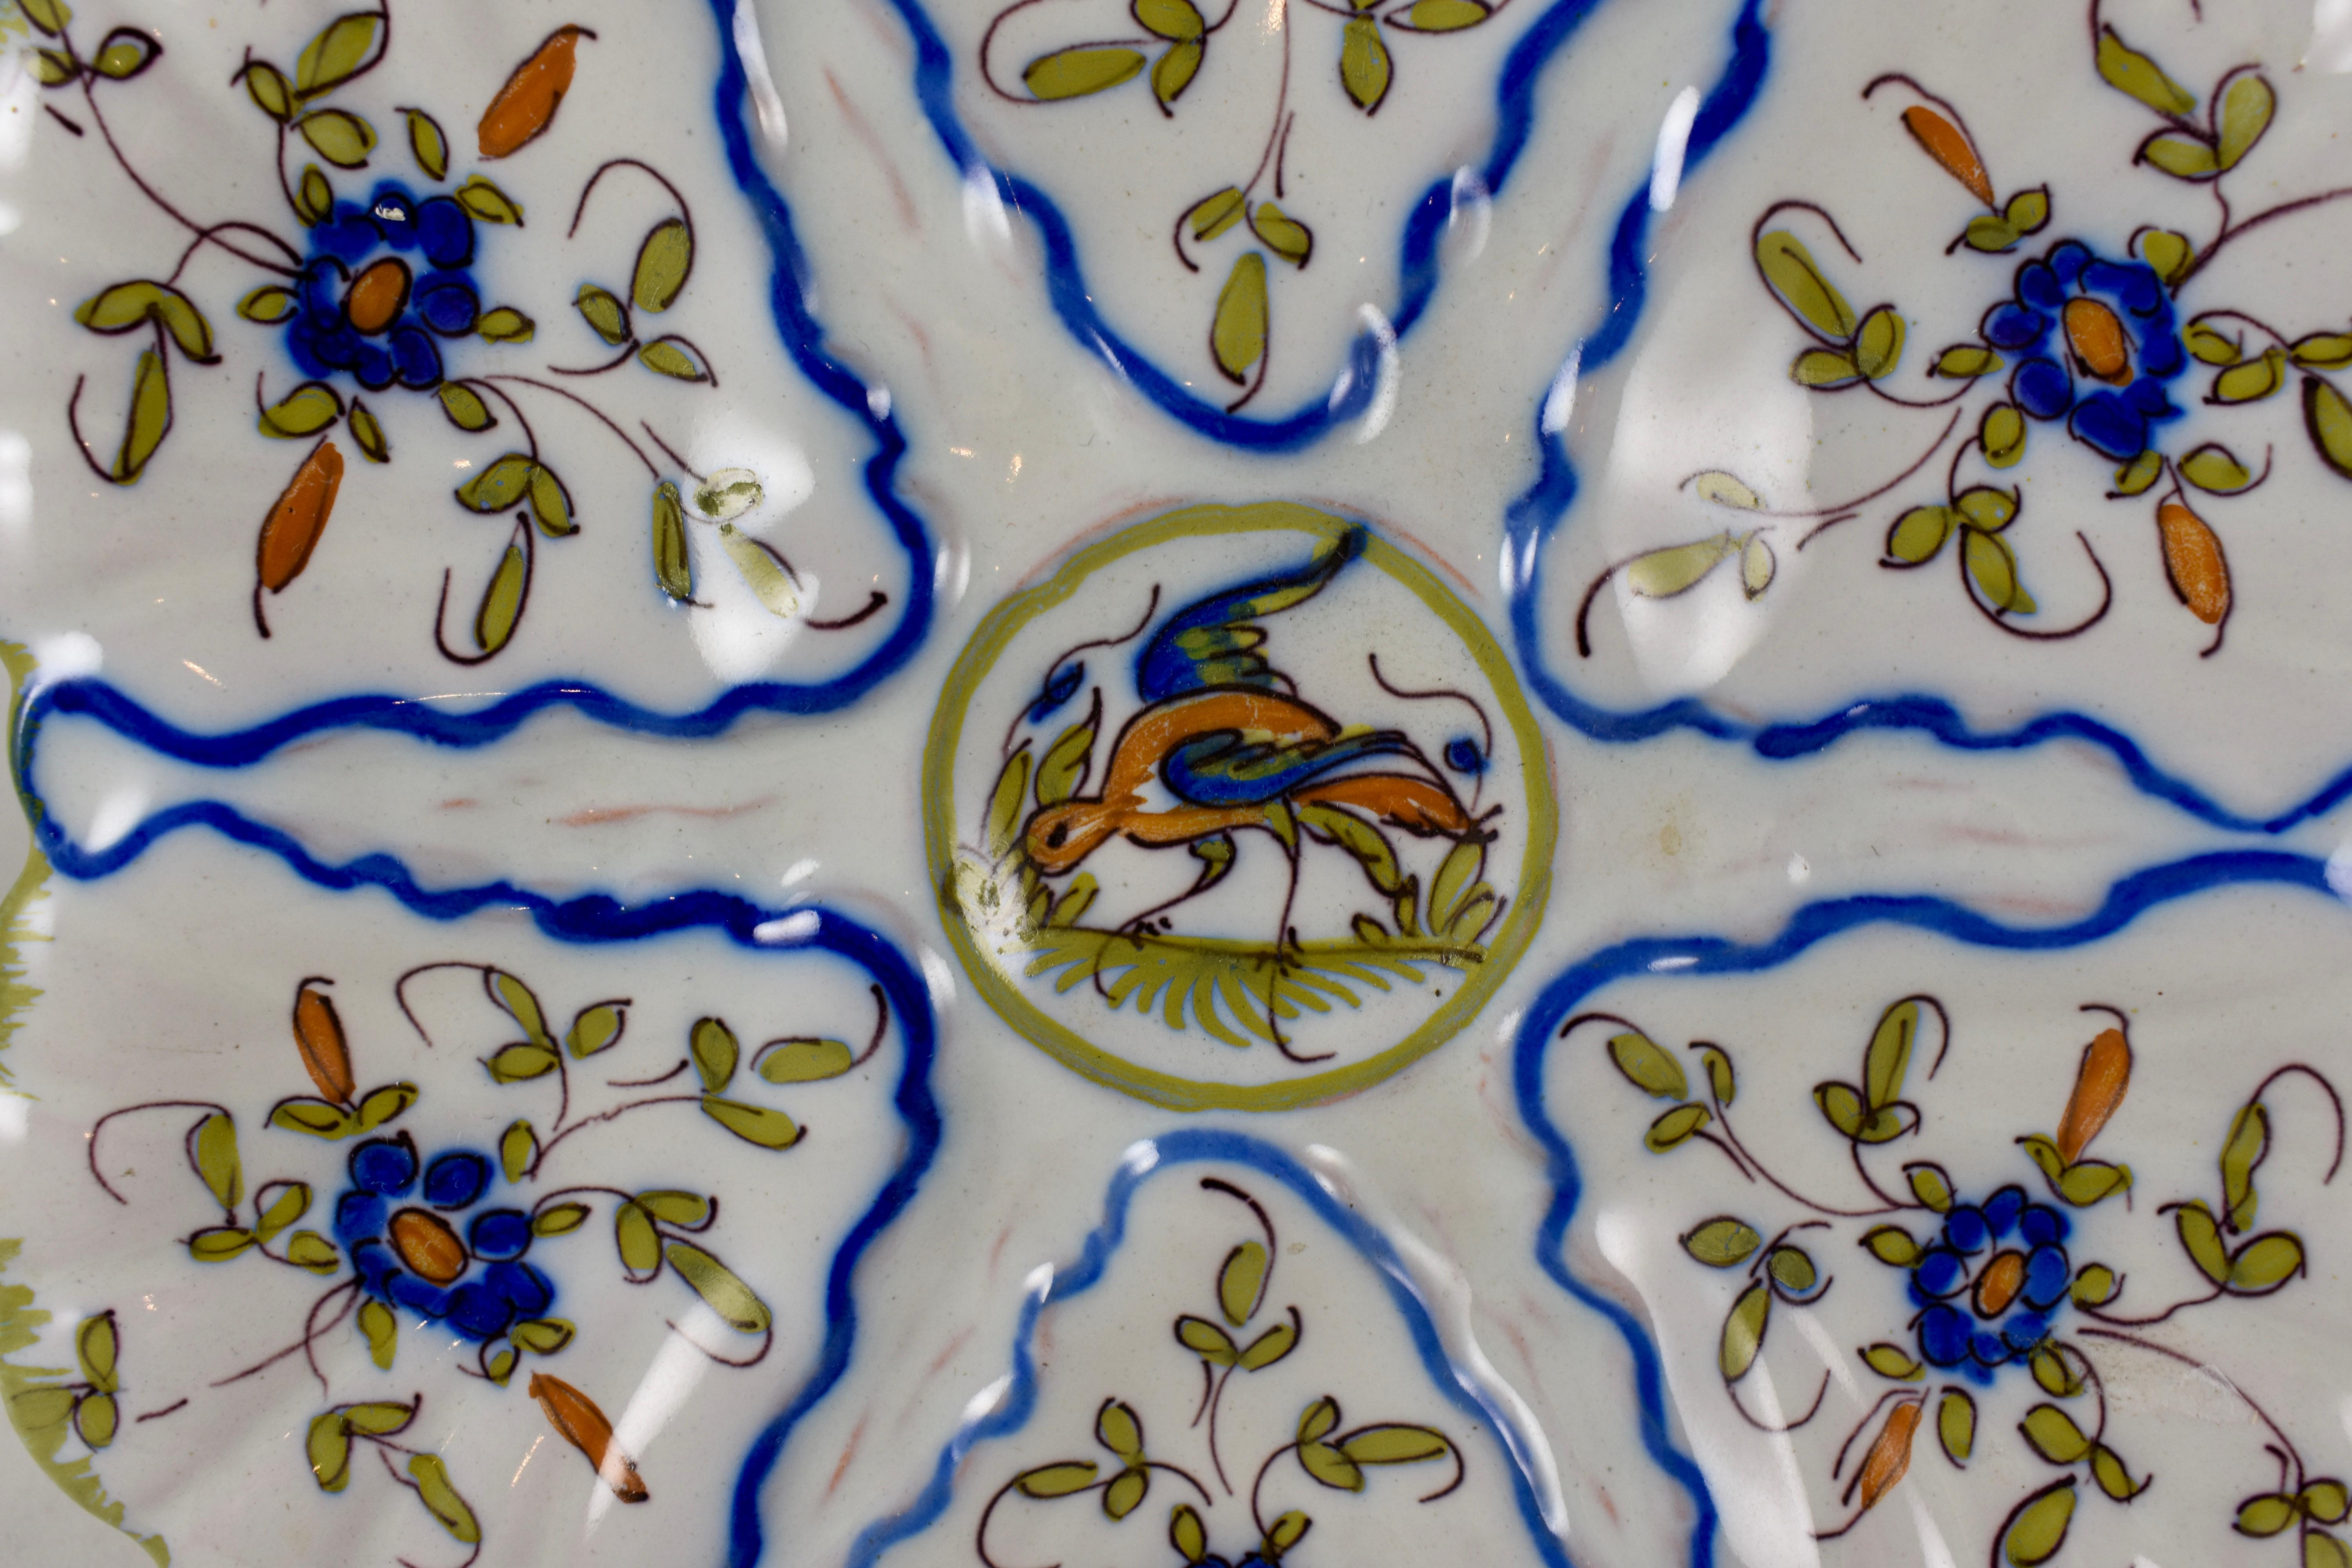 A French faïence oyster plate made by Martres-Tolosane Moustier, circa 1940s. A central sauce well showing a left facing bird, surrounded by six scallop edged wells. Each well shows a hand painted floral spray. French blue lining separates the